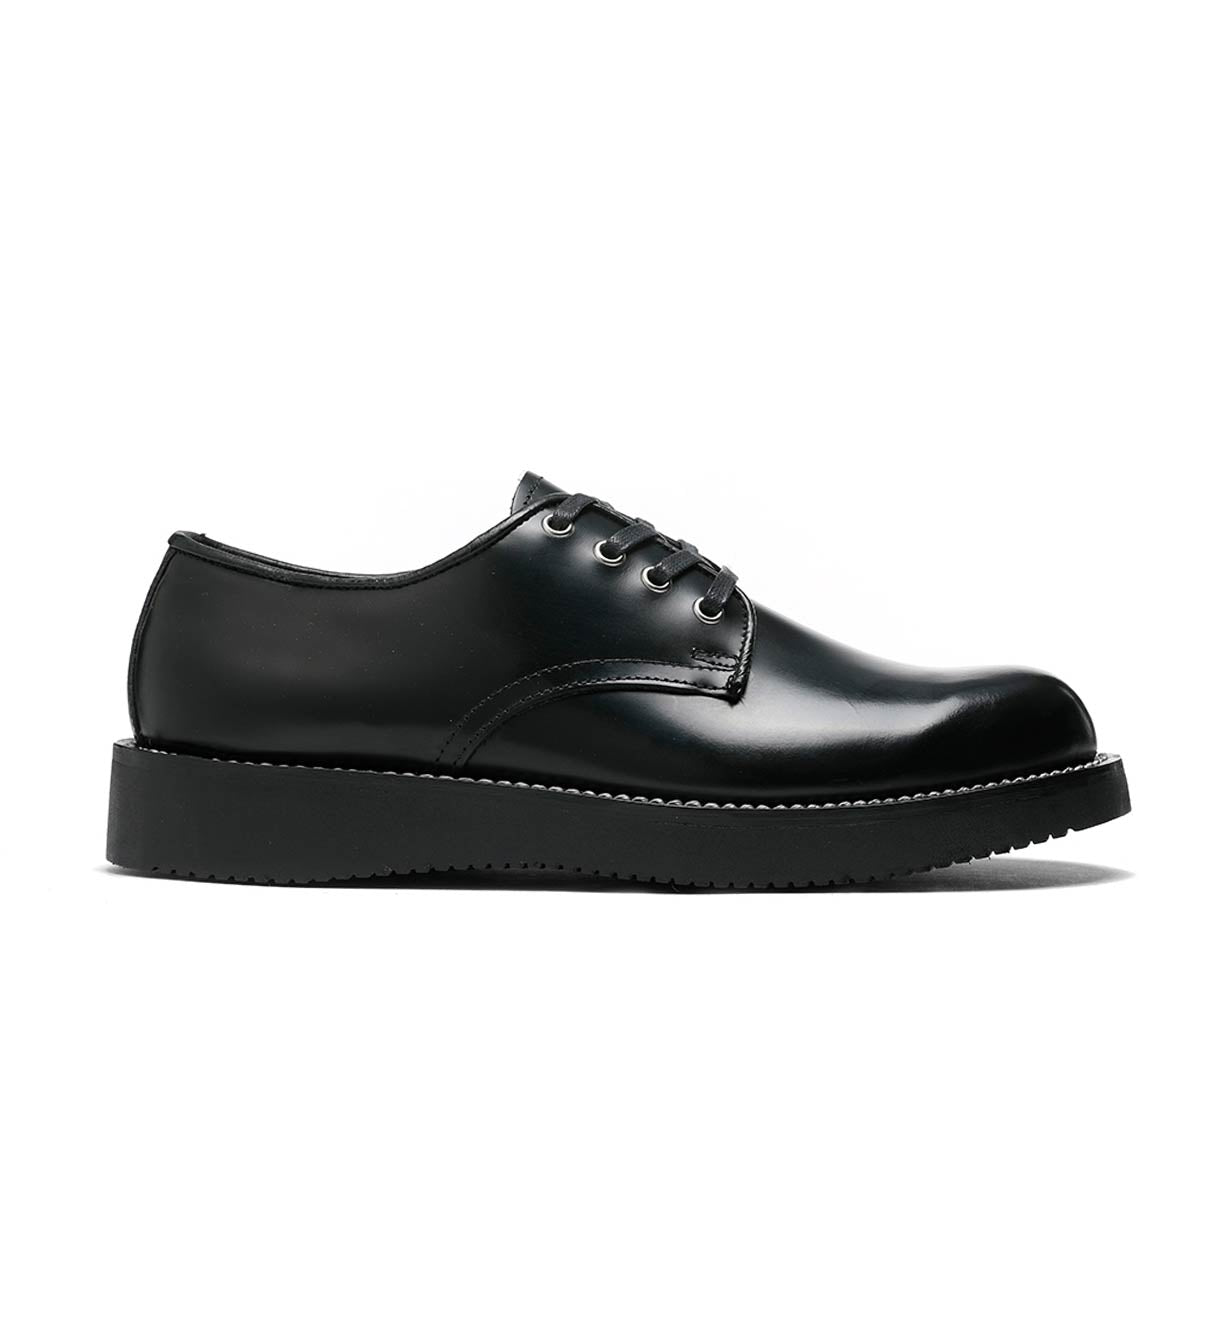 A pair of black Michael derby shoes with leather uppers and a vibram wedge outsole on a white background by Broken Homme.